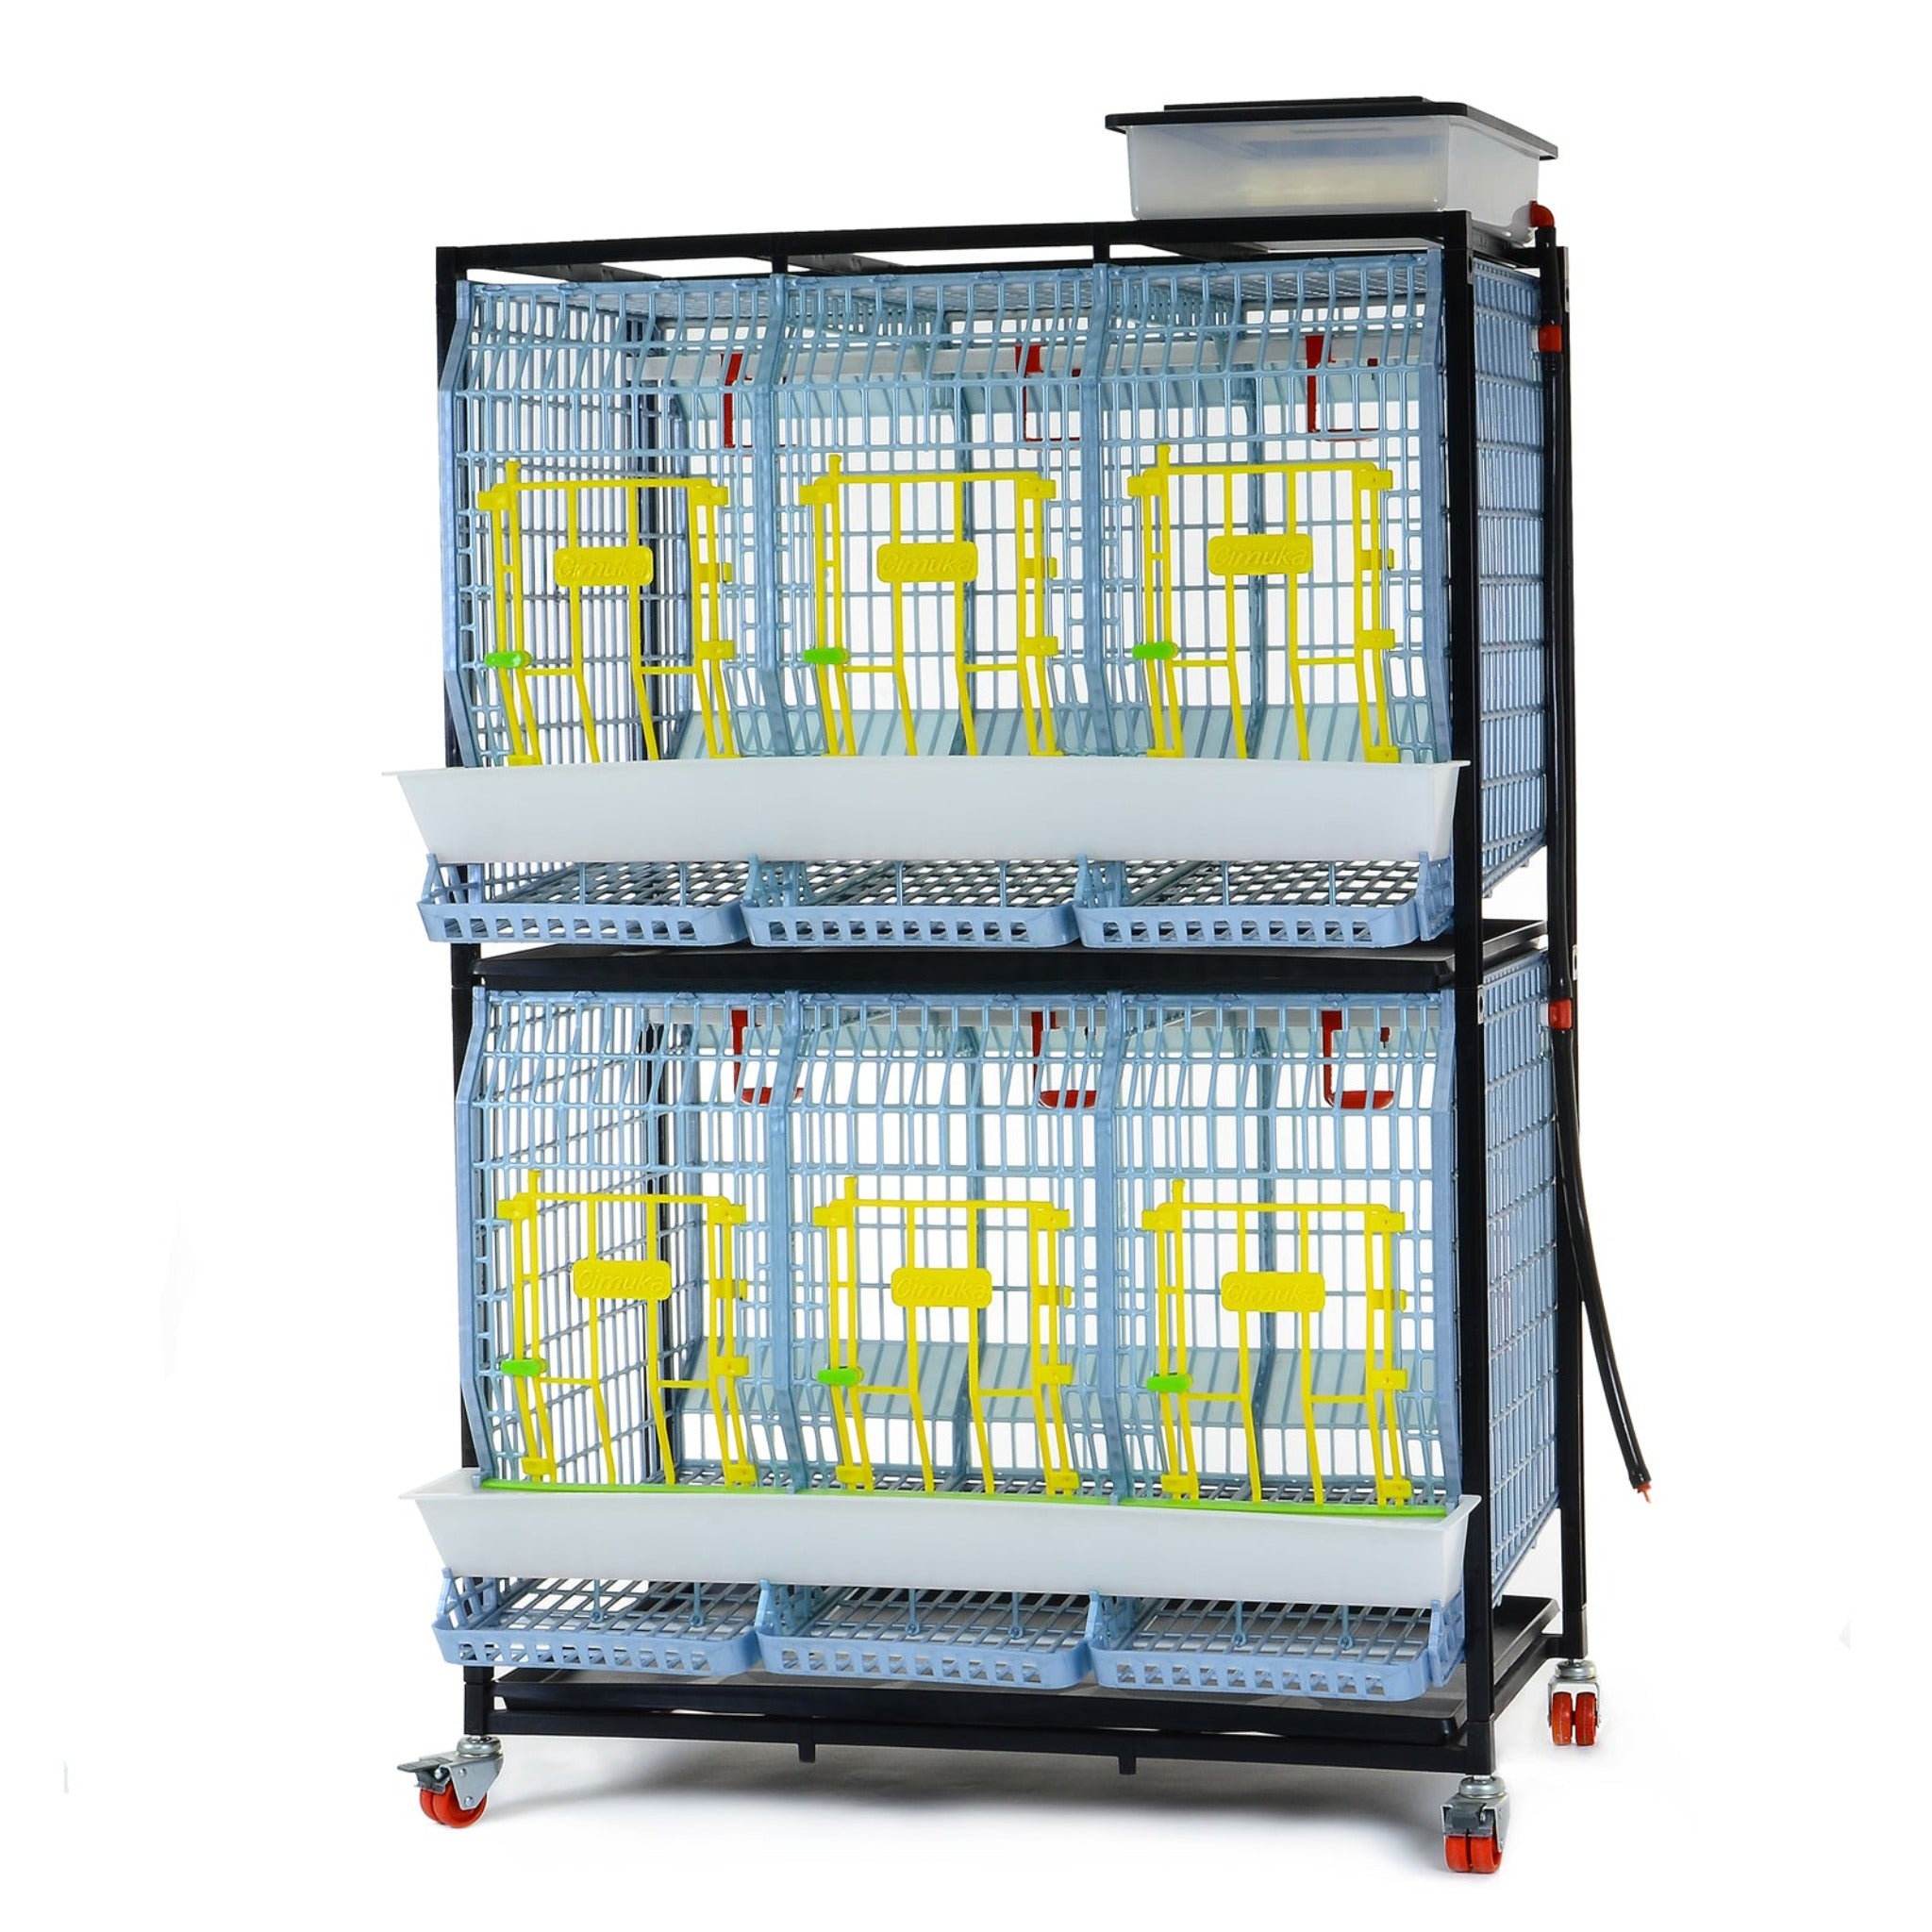 Hatching Time Cimuka. TYK60 22” Chicken cage 2 layer. Image shows chicken cage front. Roll out egg trays can be seen on front under feeding trough. Water reservoir tank is on top of cage with hose going down for automatic drinker system.